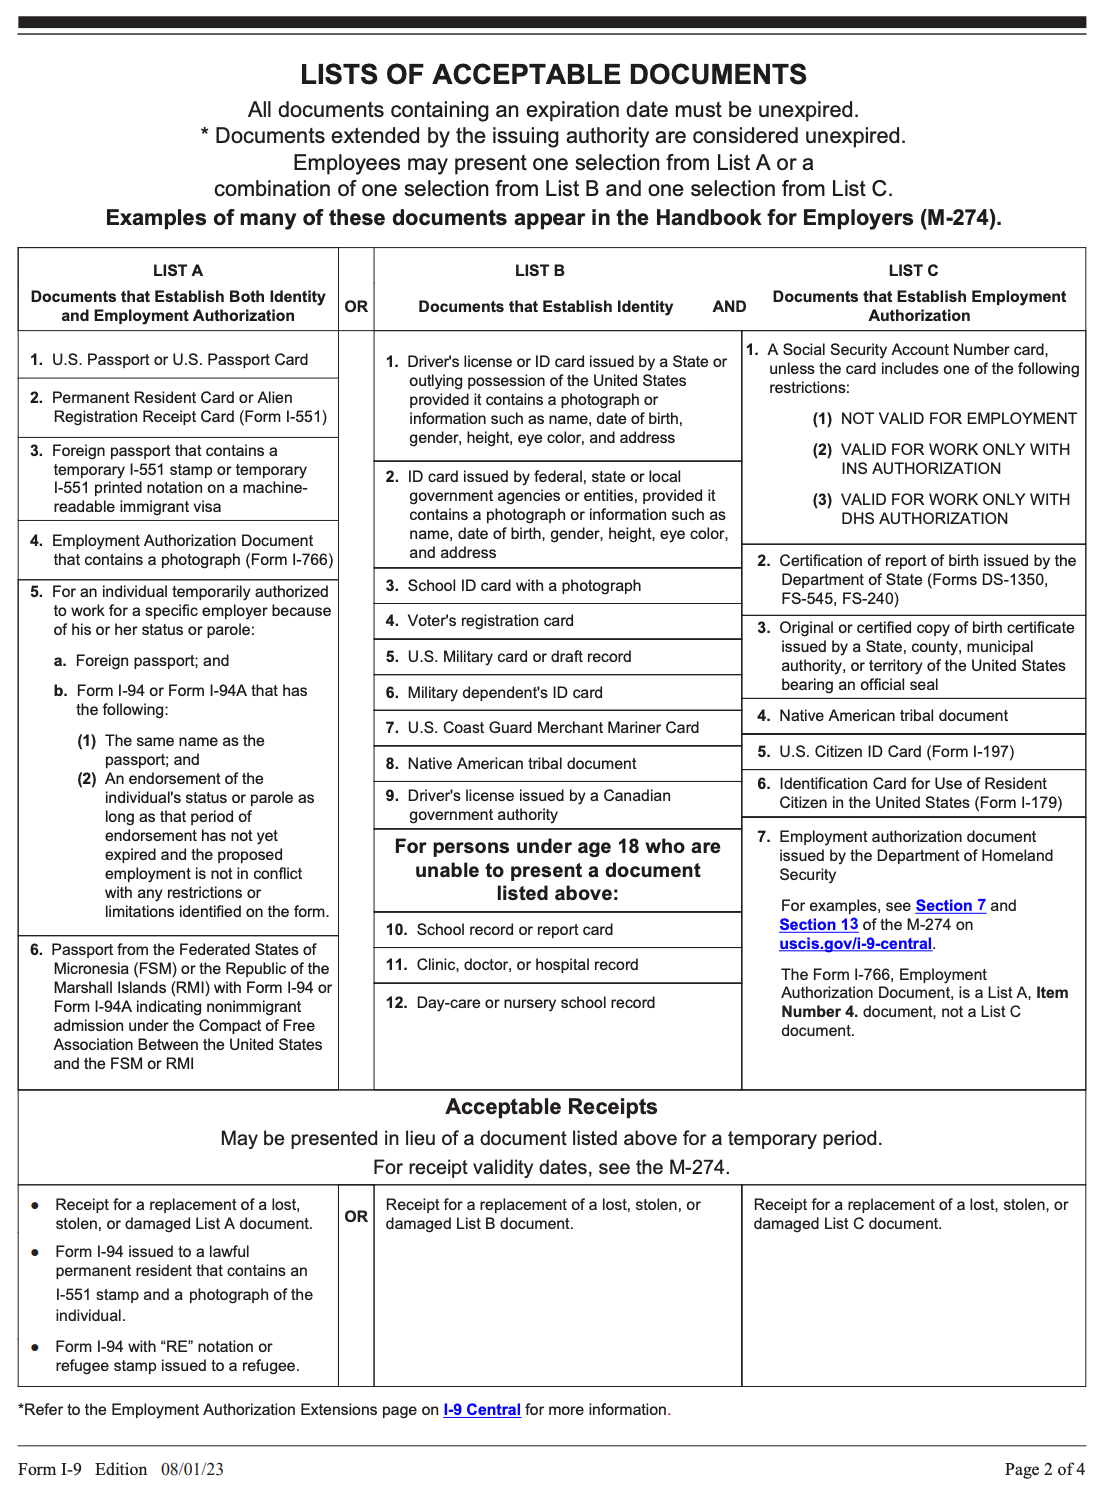 Georgetown University I-9 Process | Human Resources | Georgetown with Federal I-9 Form